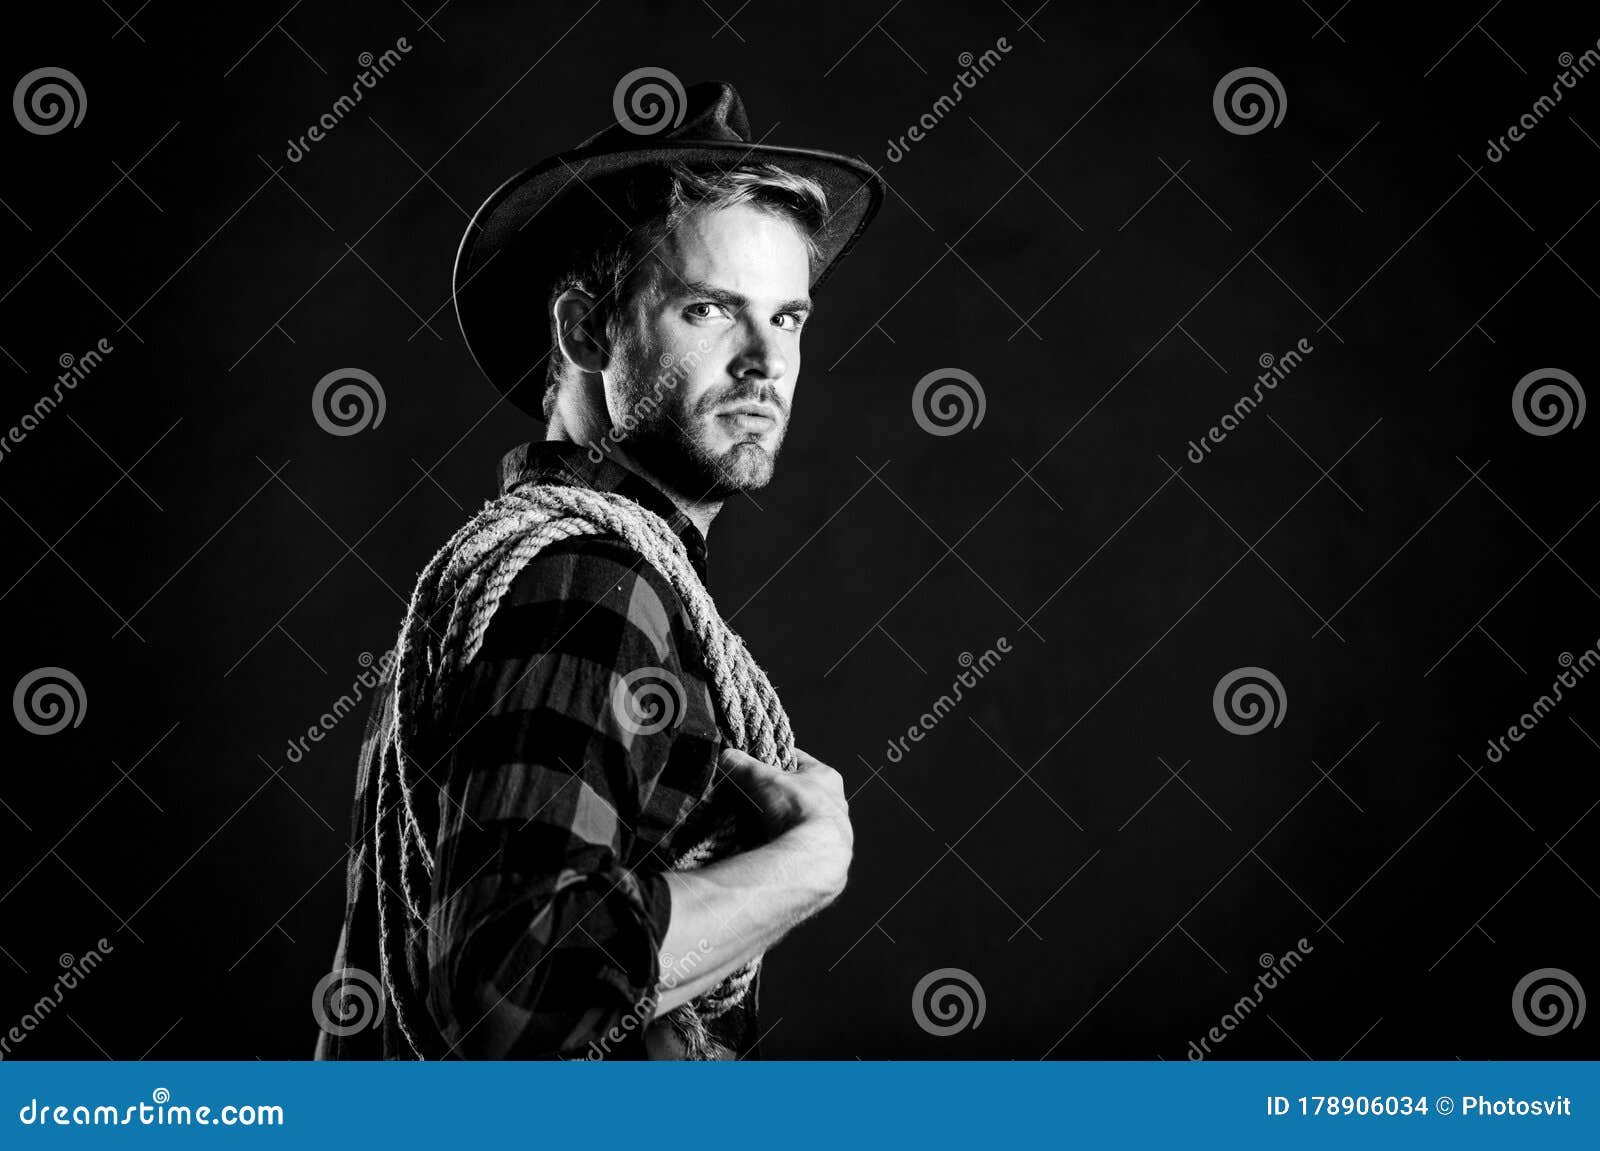 man unshaven cowboy black background. lasso is used in rodeos as part of competitive events. lasso can be tied or